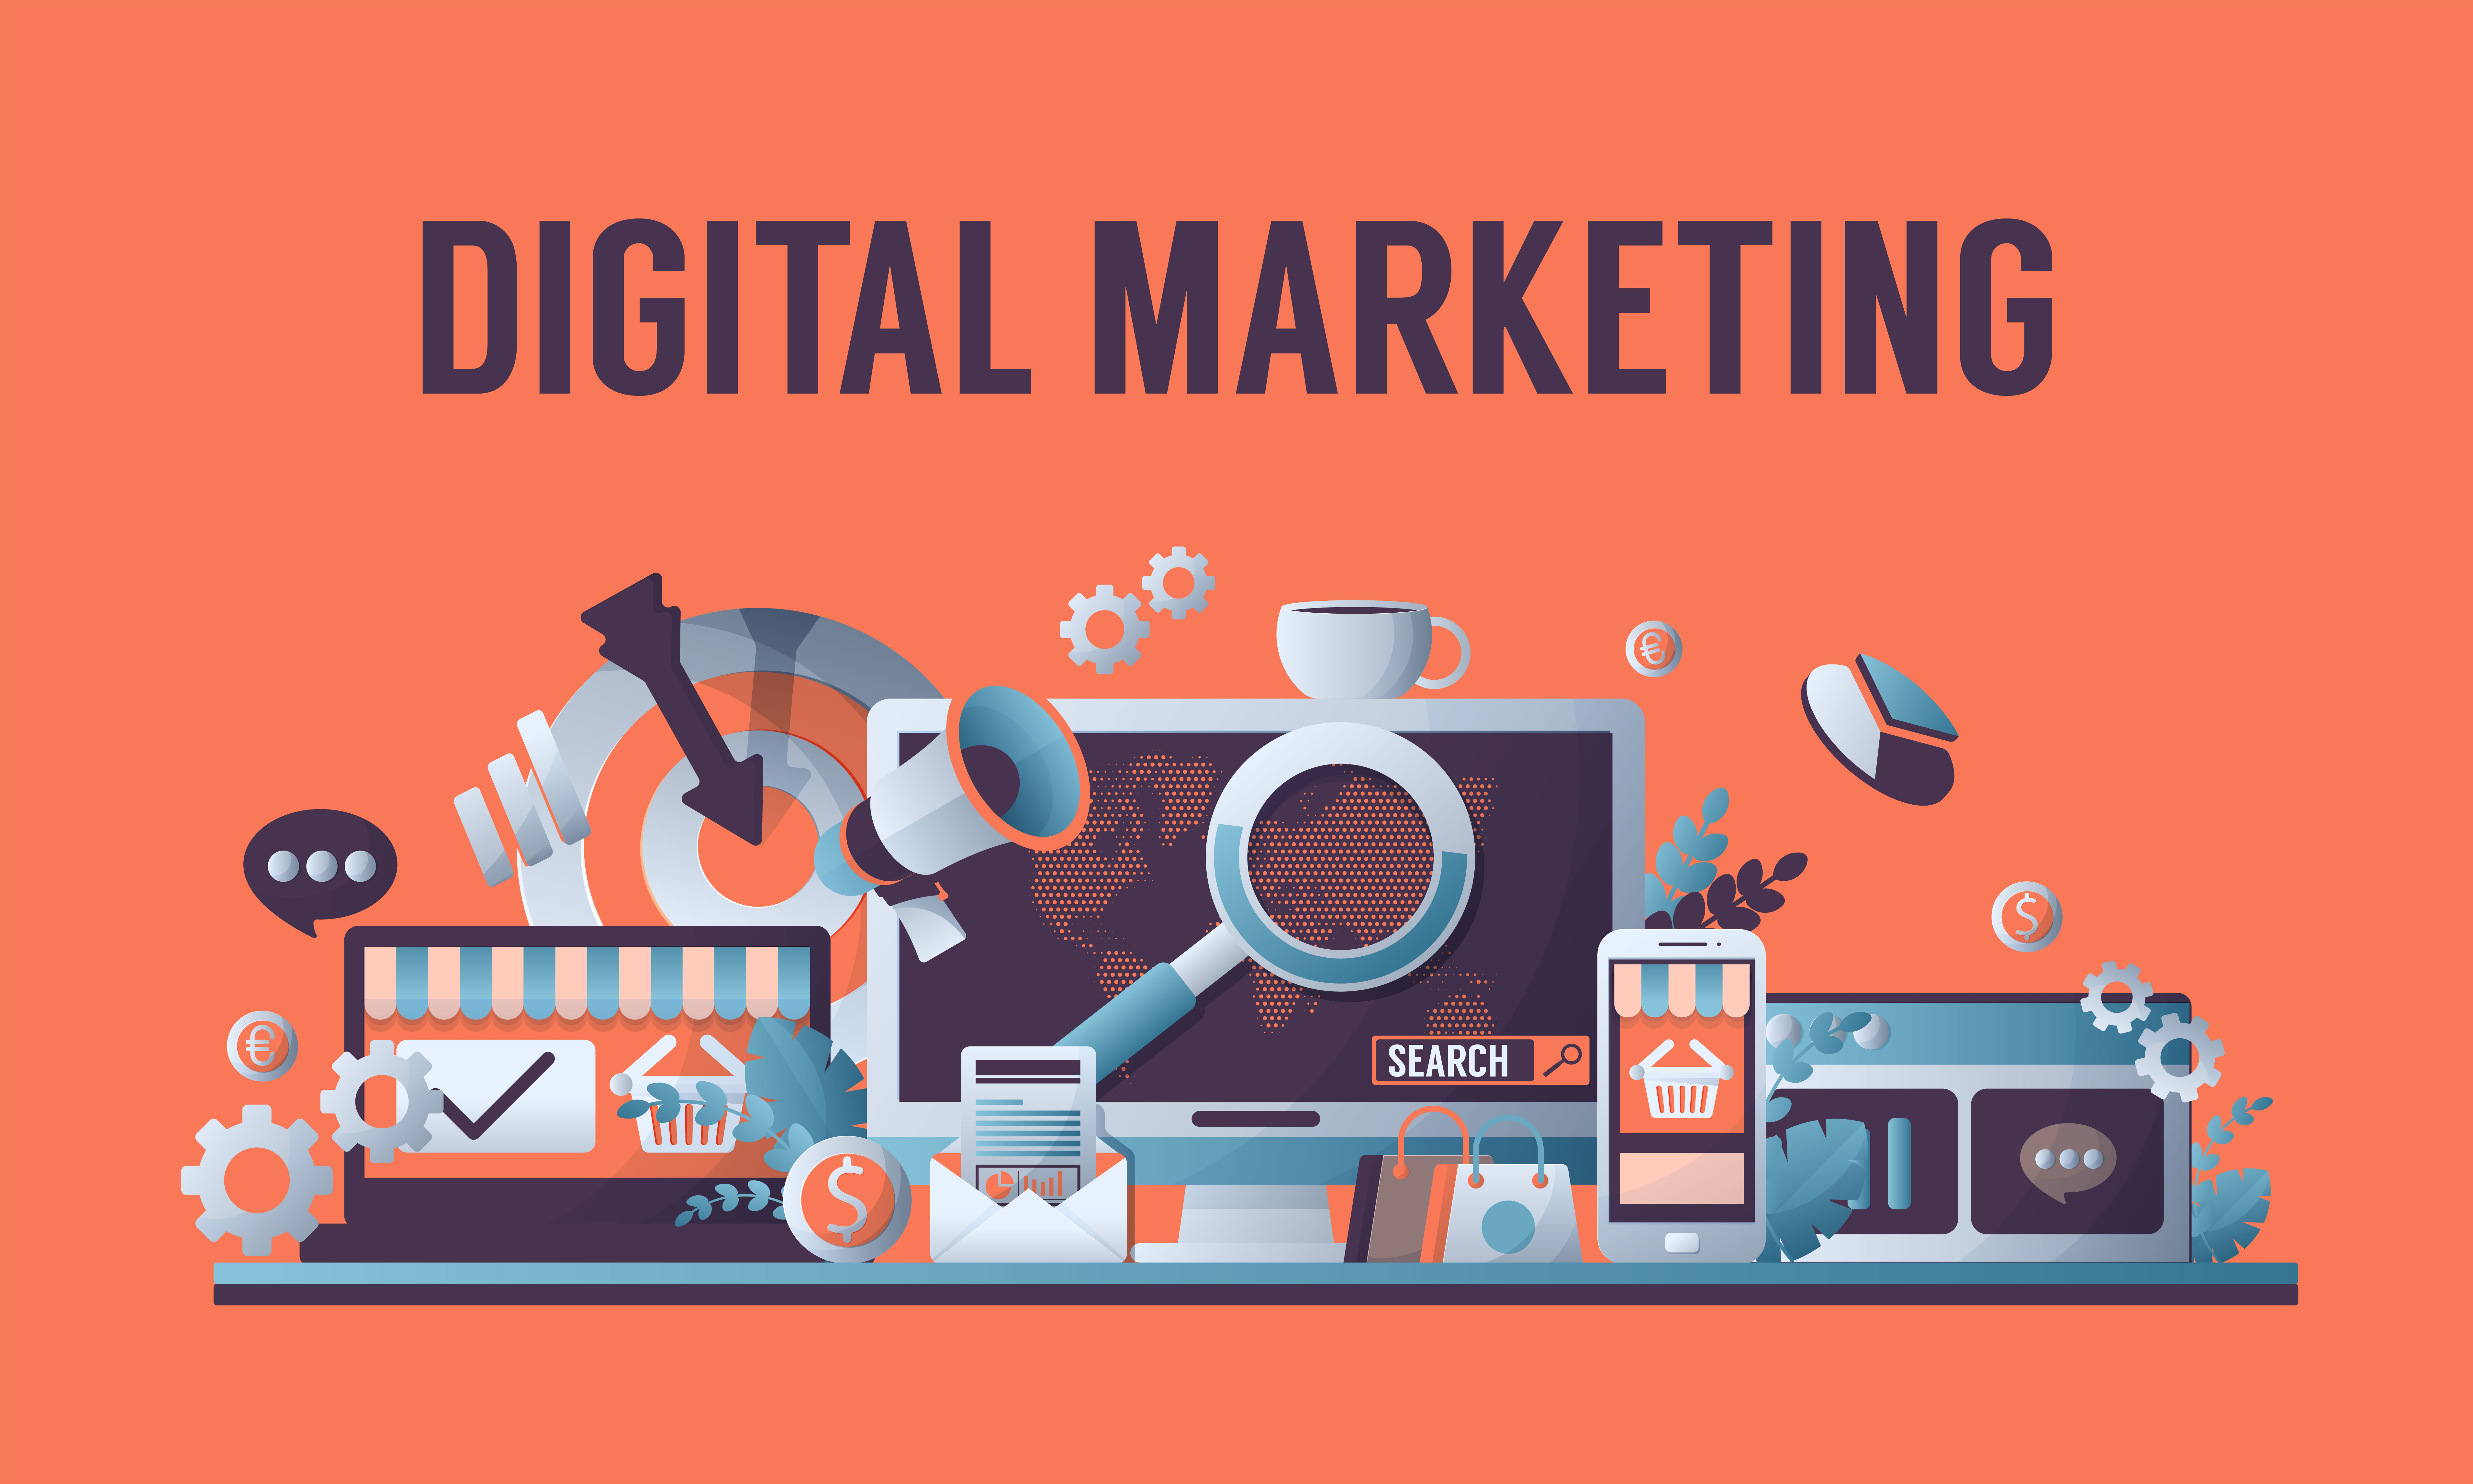 Digital Marketing banner with different devices surrounded by targets, charts, shopping bags, data reports, settings and currencies all with salmon background colour